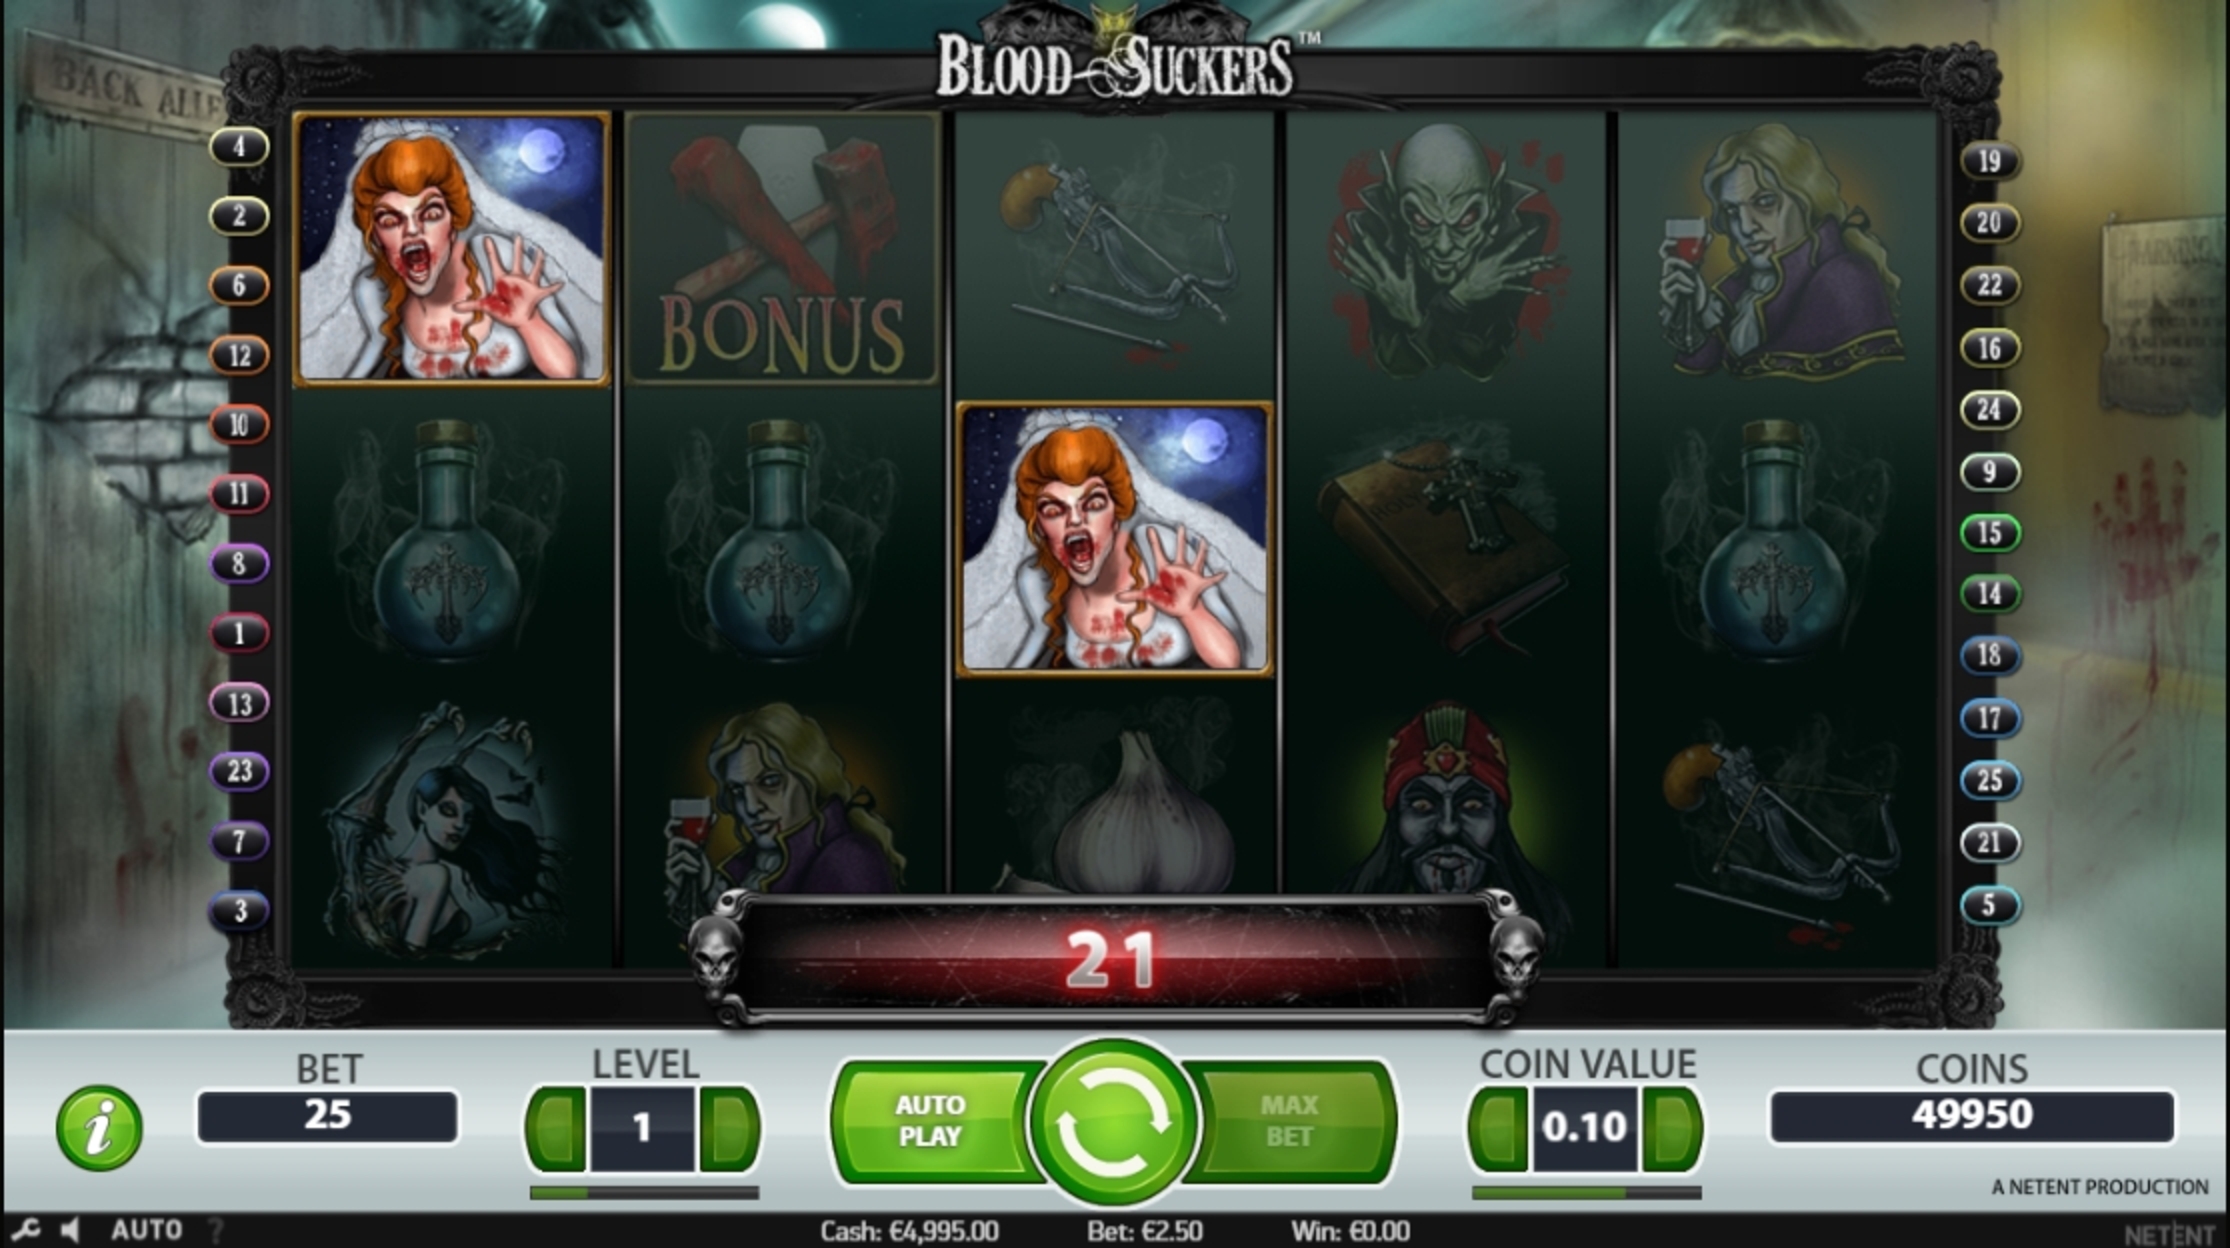 Win Money in Blood Suckers Free Slot Game by NetEnt